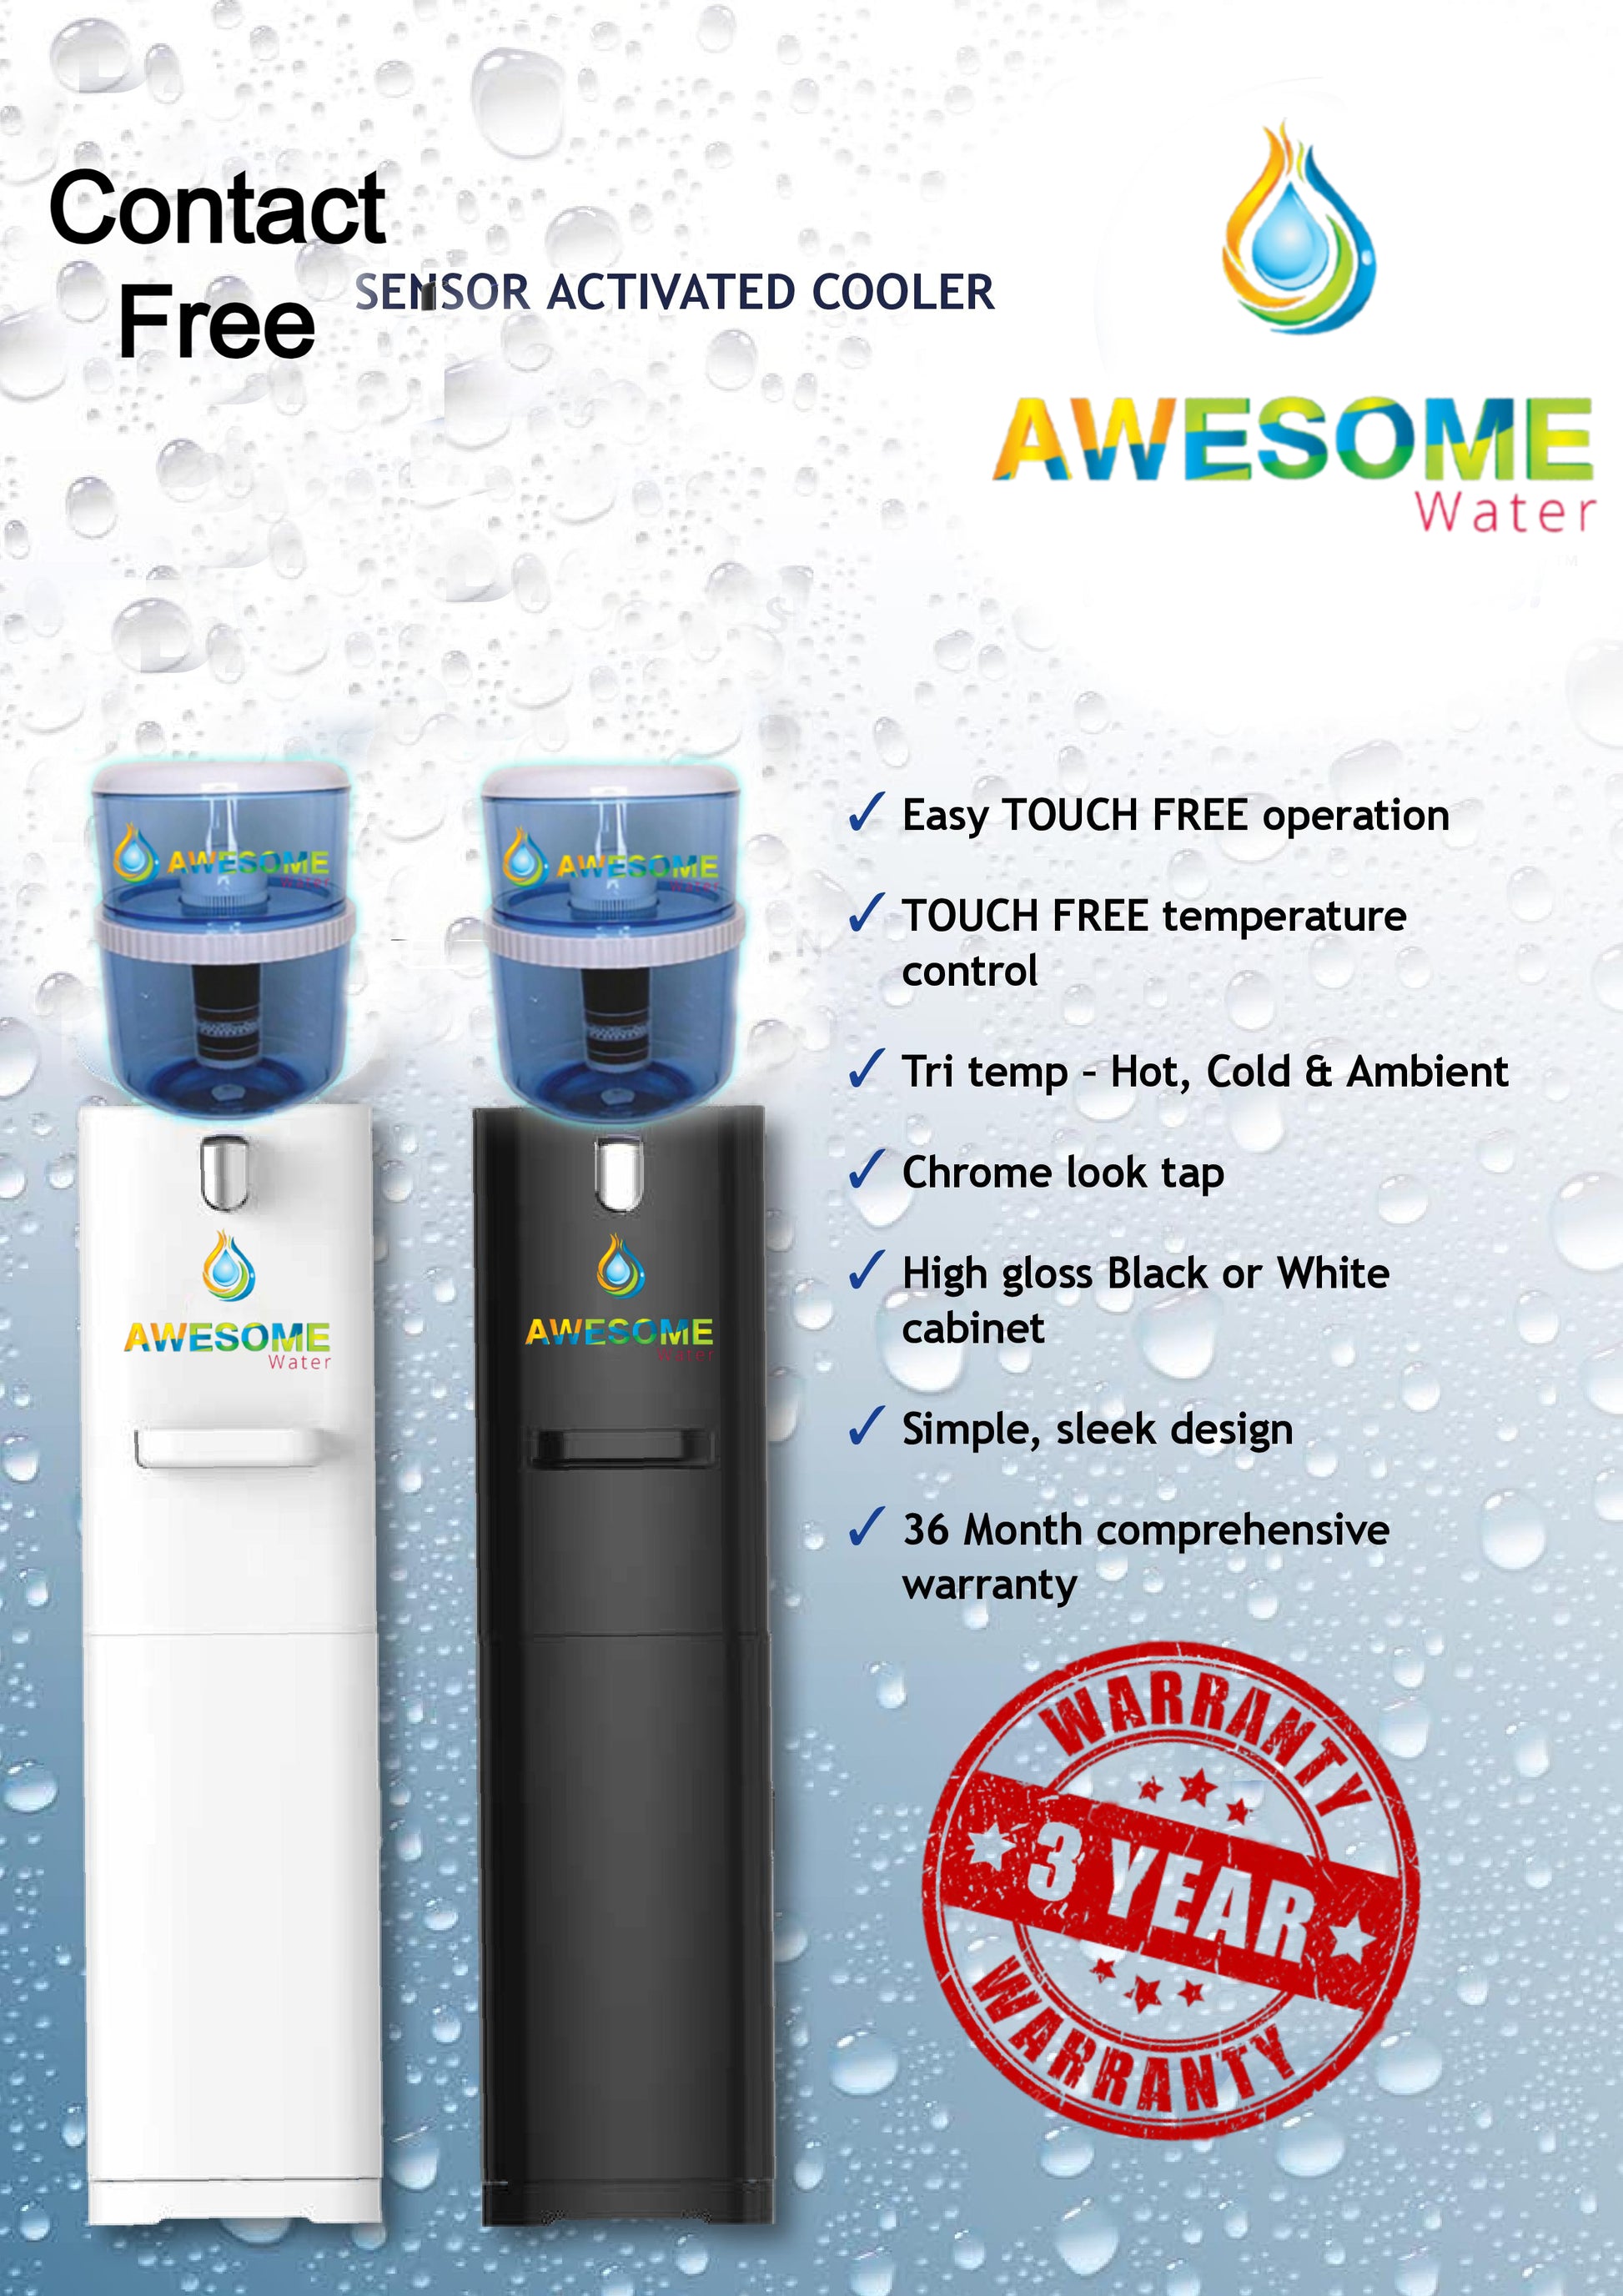 Awesome Contact Free Cooler - Awesome Water